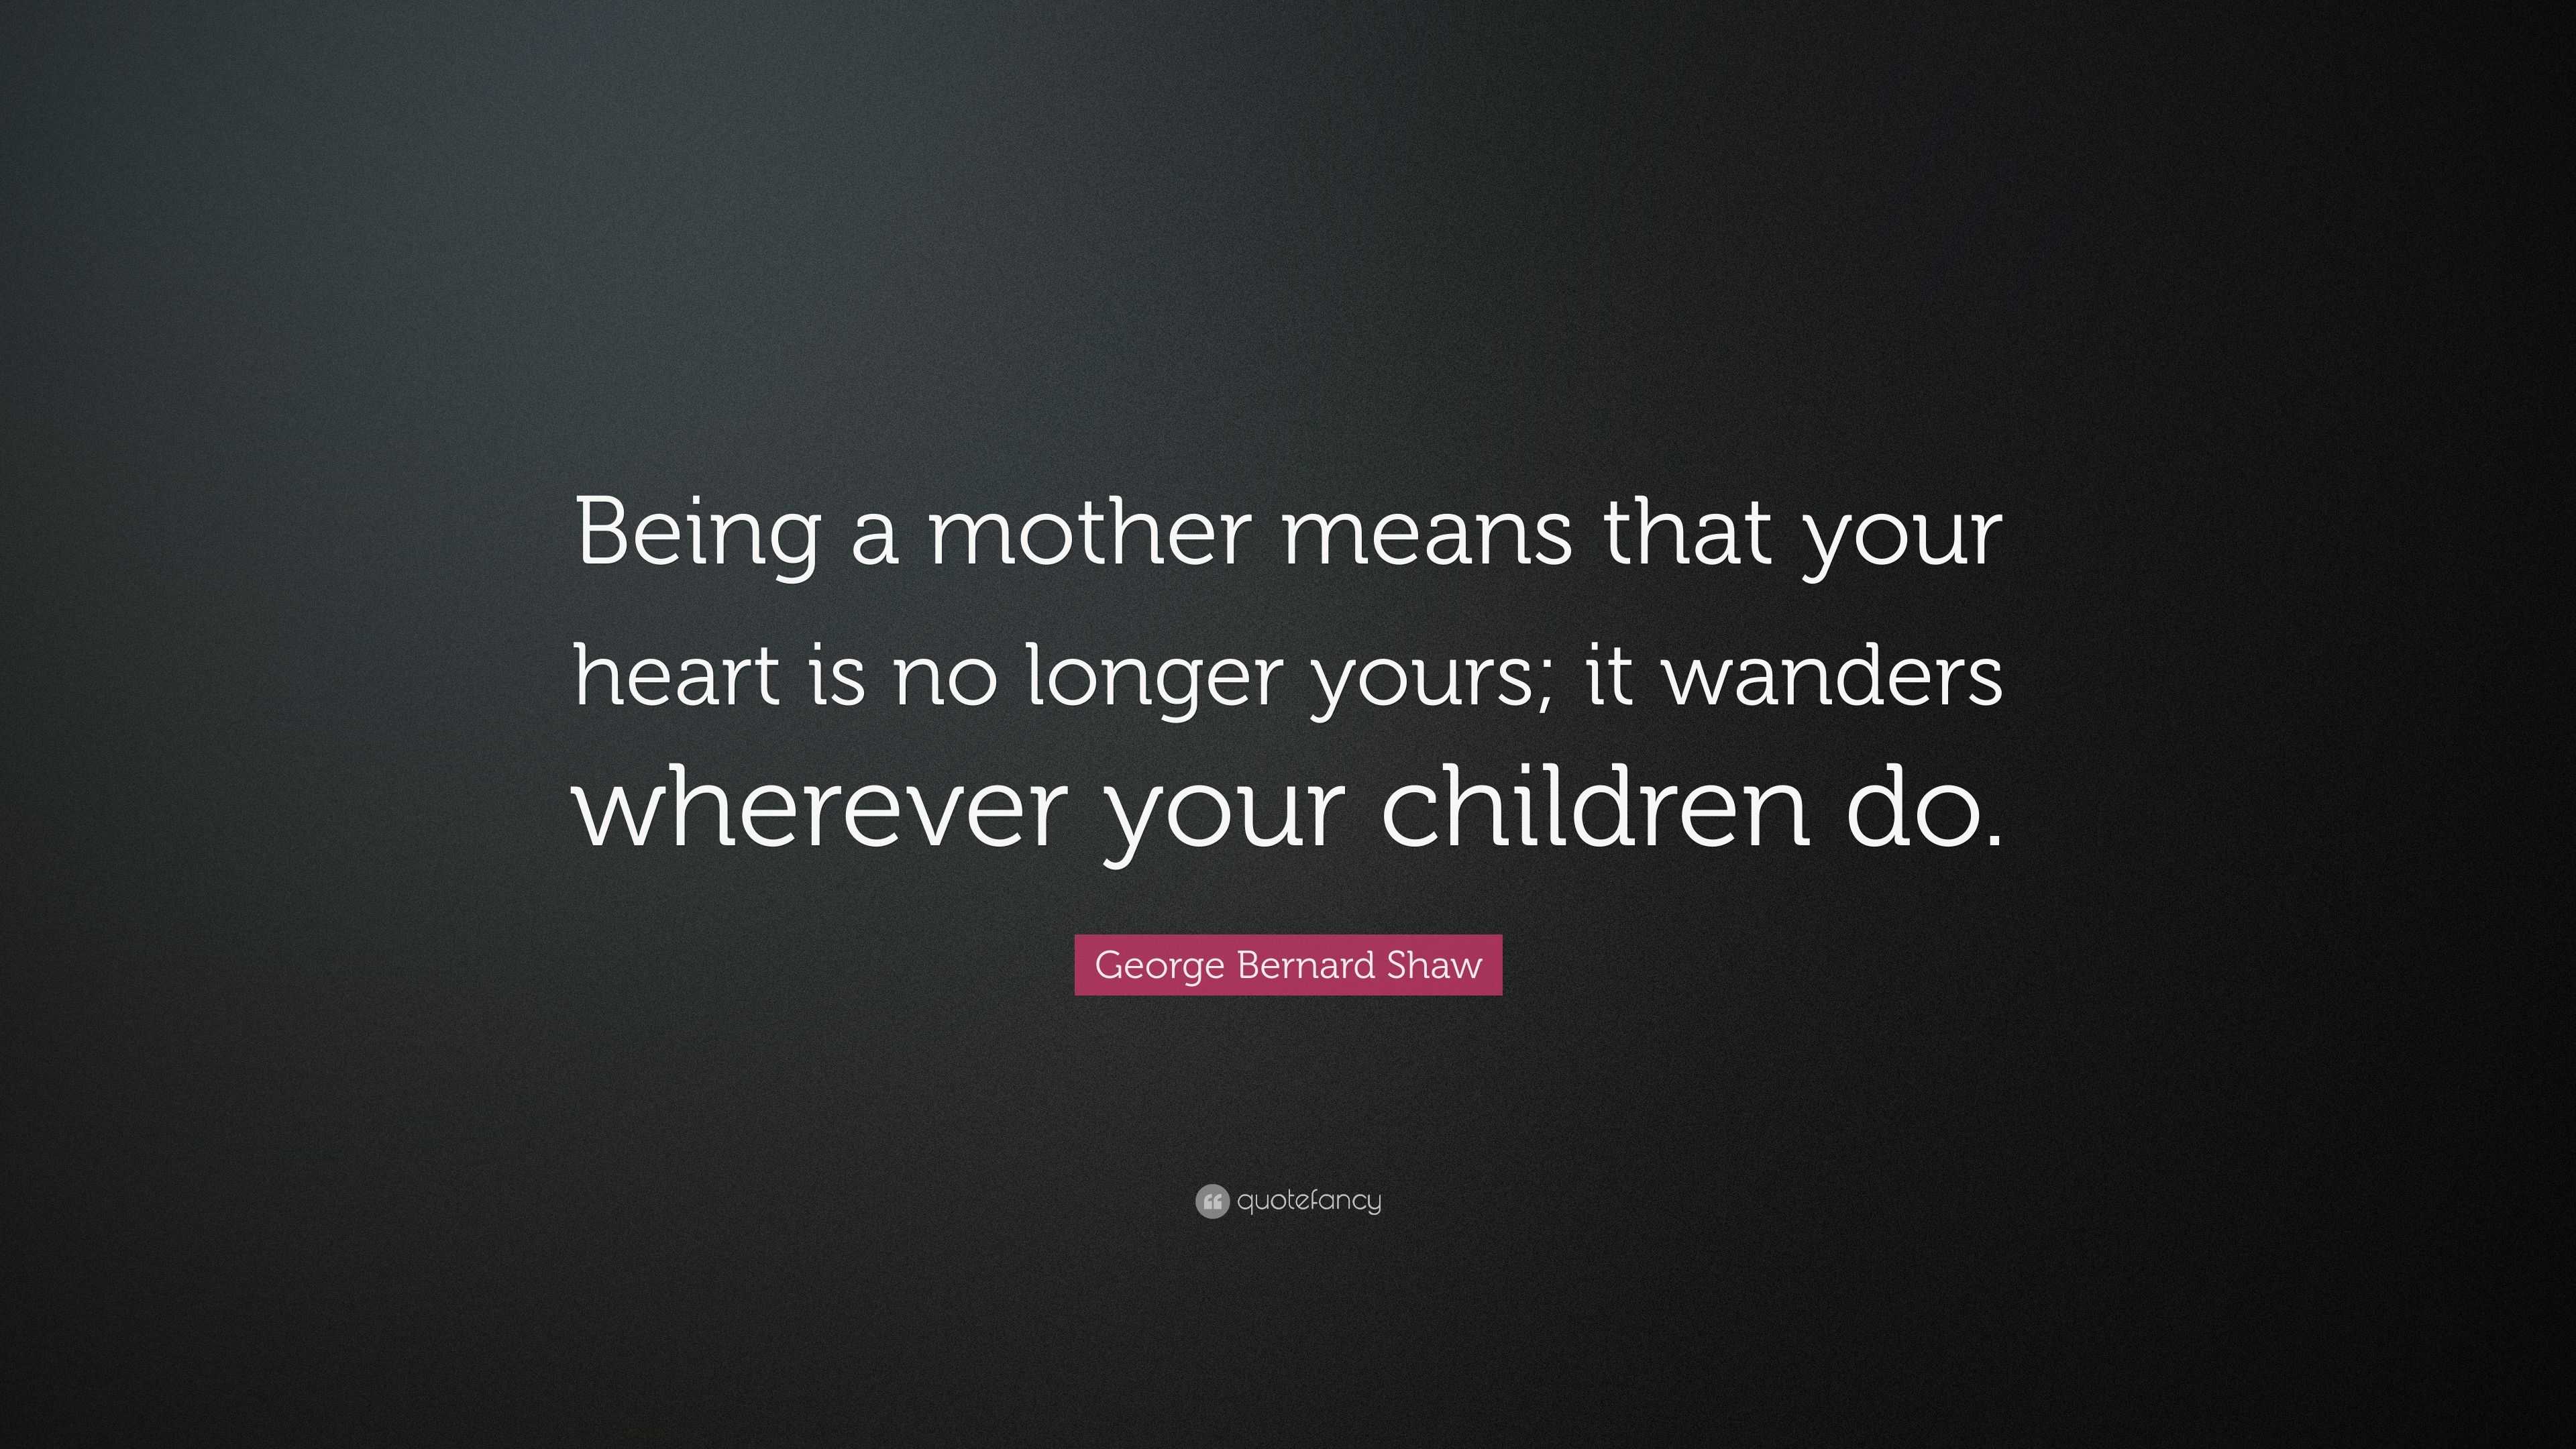 George Bernard Shaw Quote: “Being a mother means that your heart is no ...